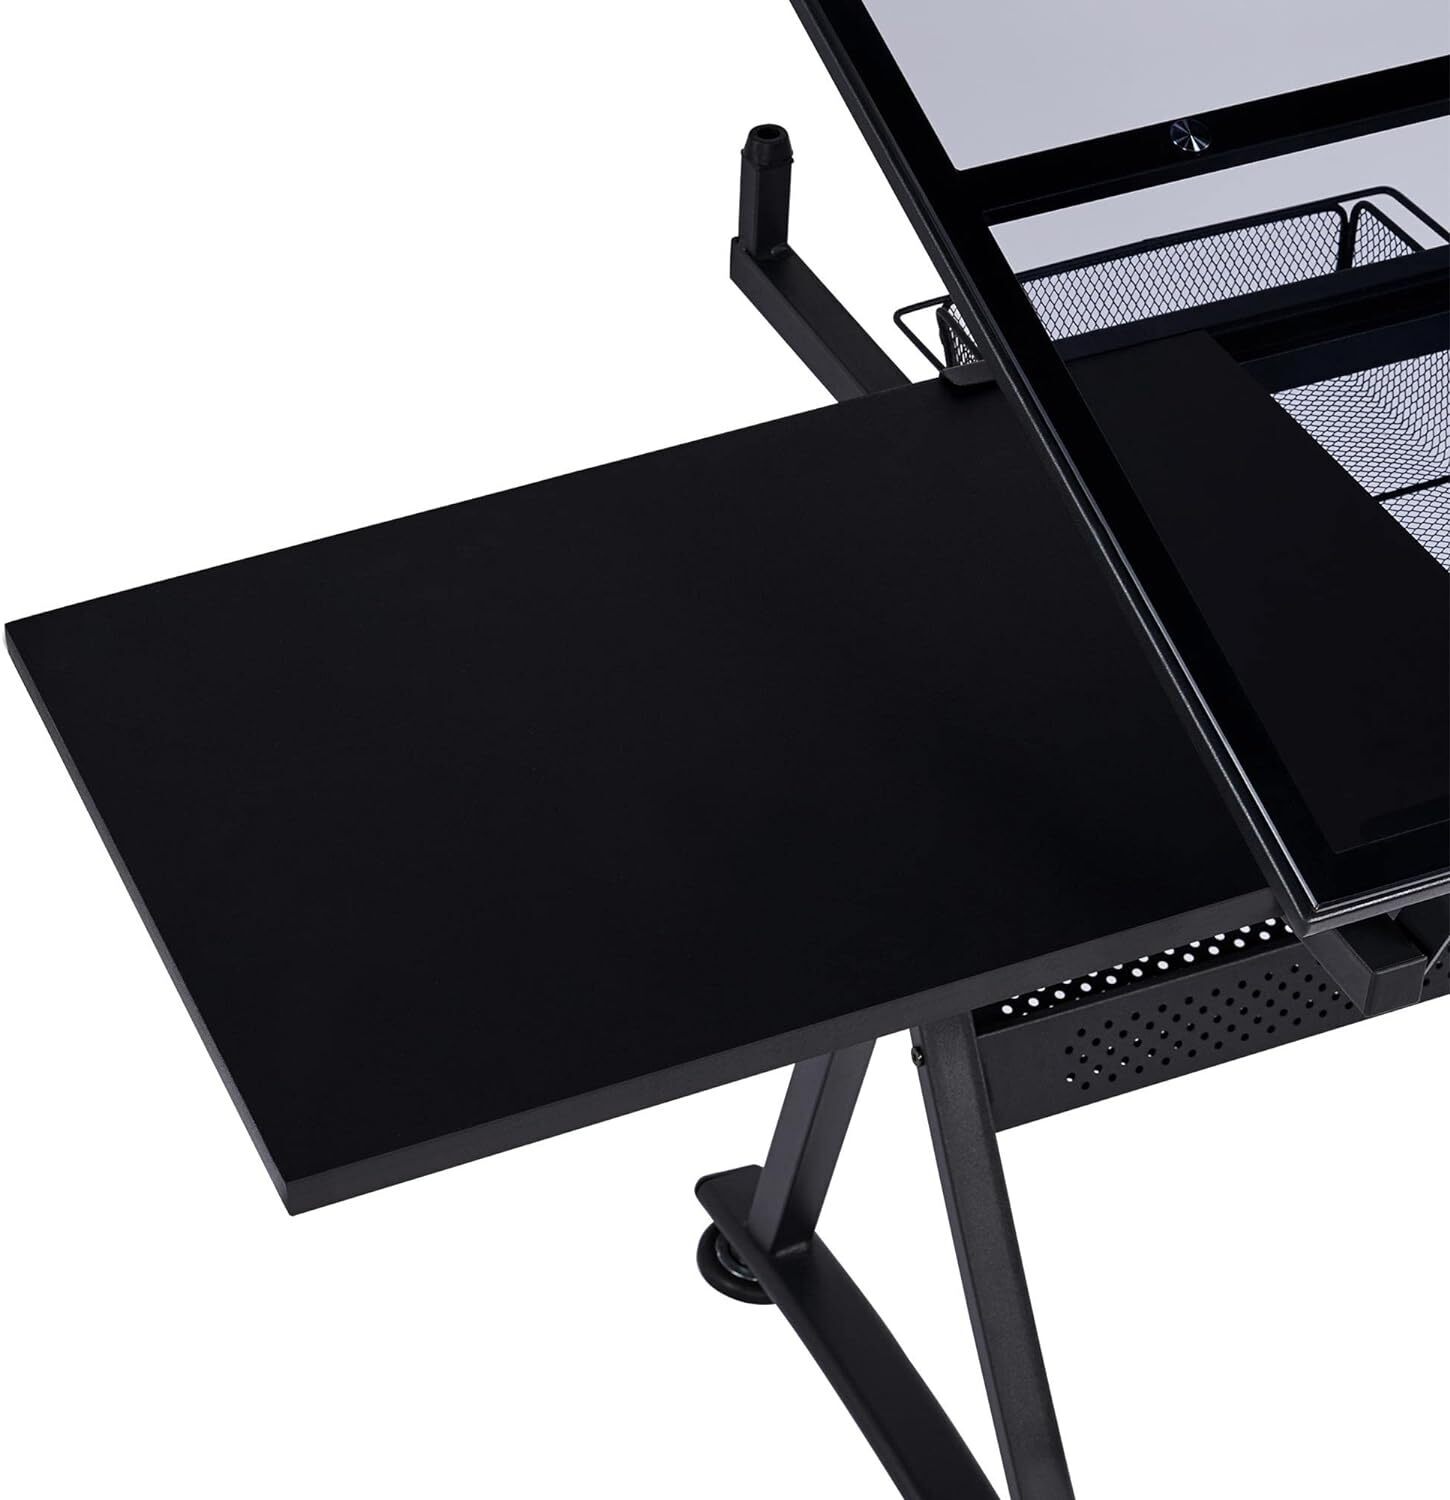 Drafting table with stool height adjustable - Qjtsdwp